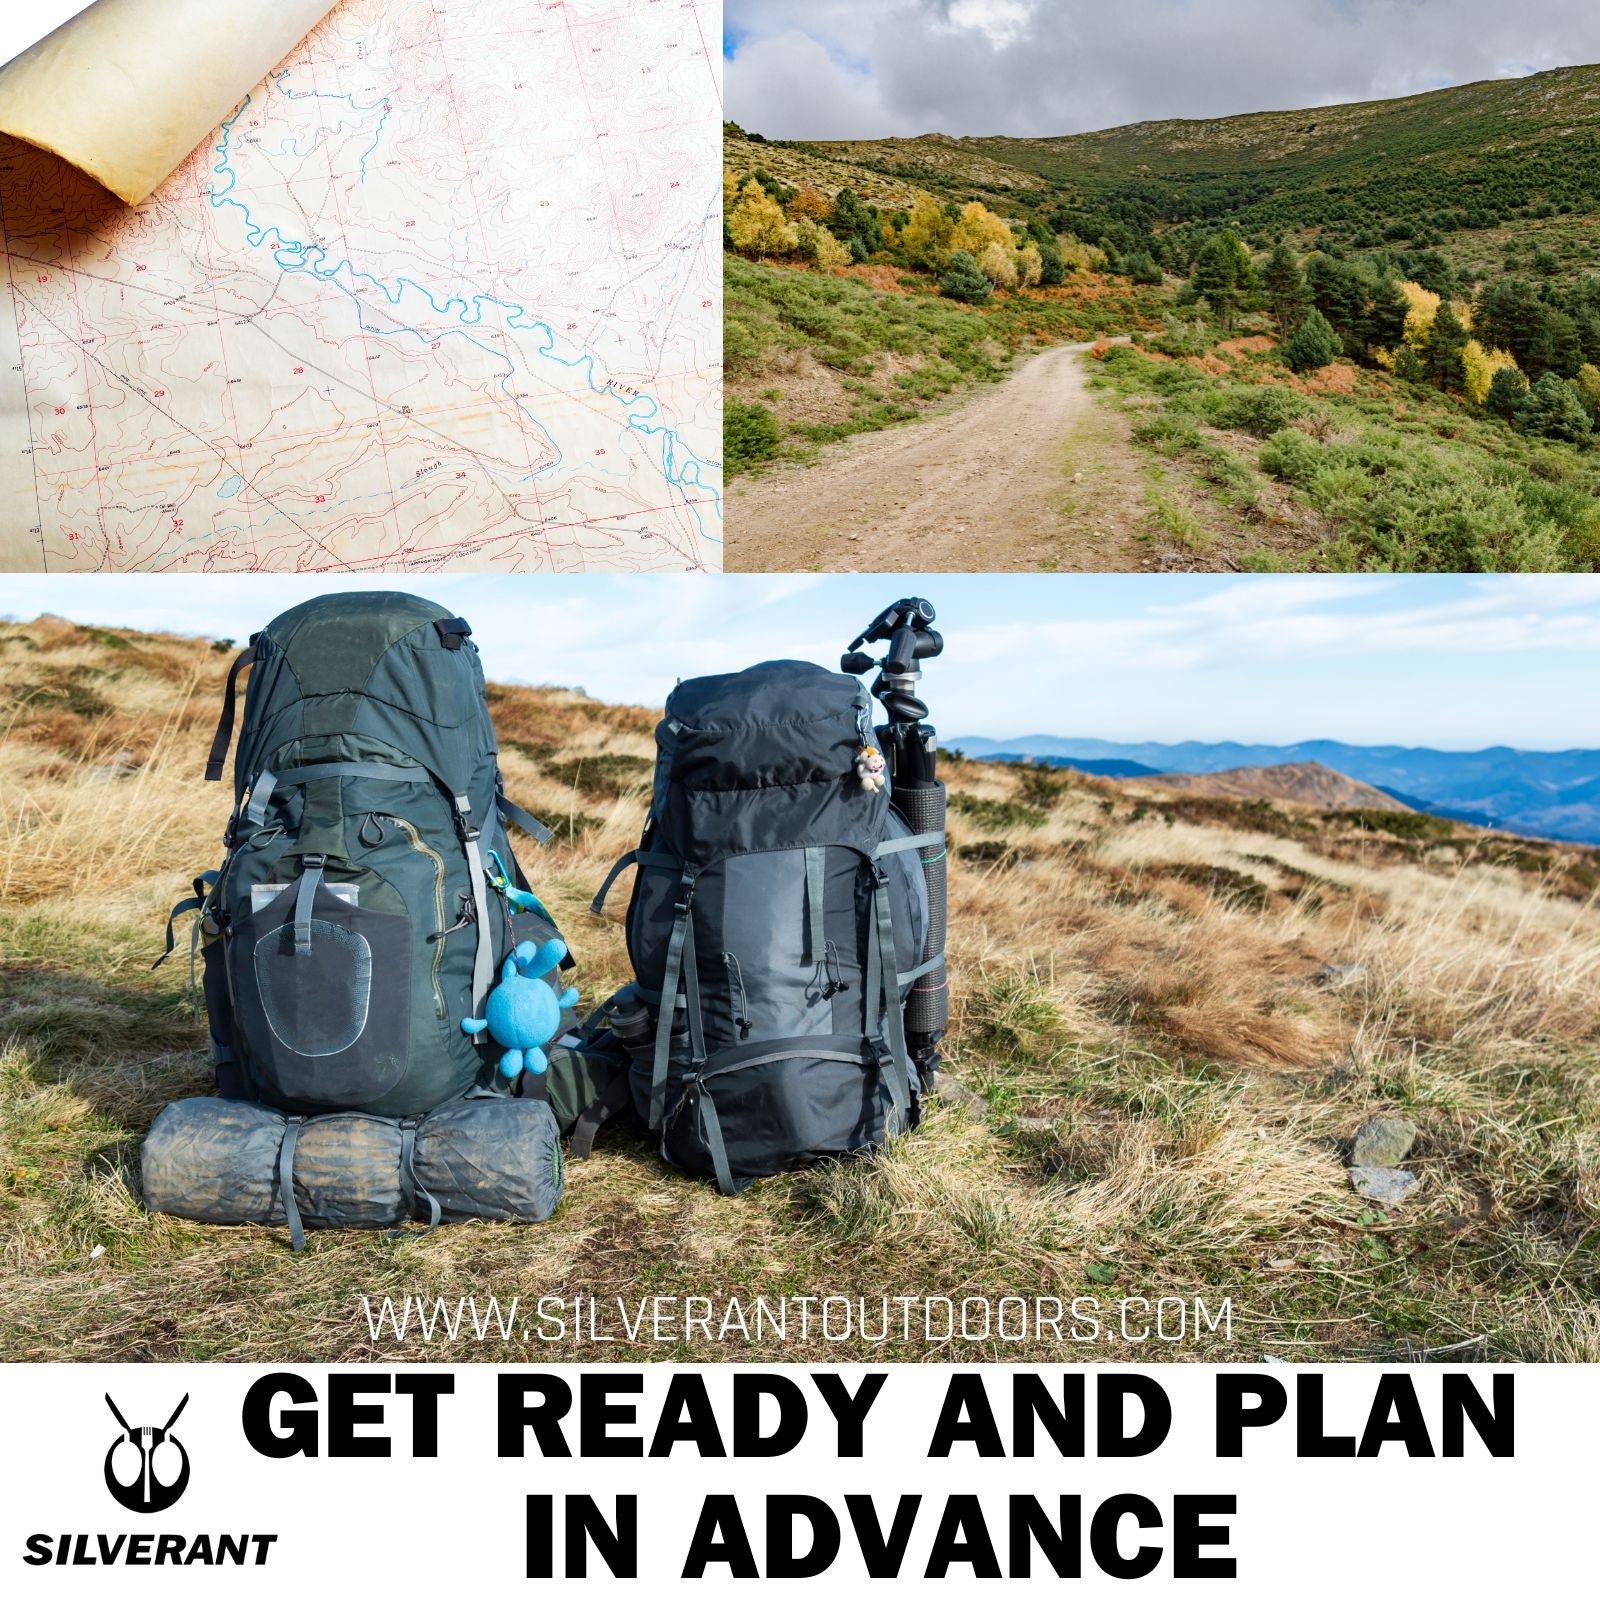 Get ready and plan in advance - SilverAnt Outdoors